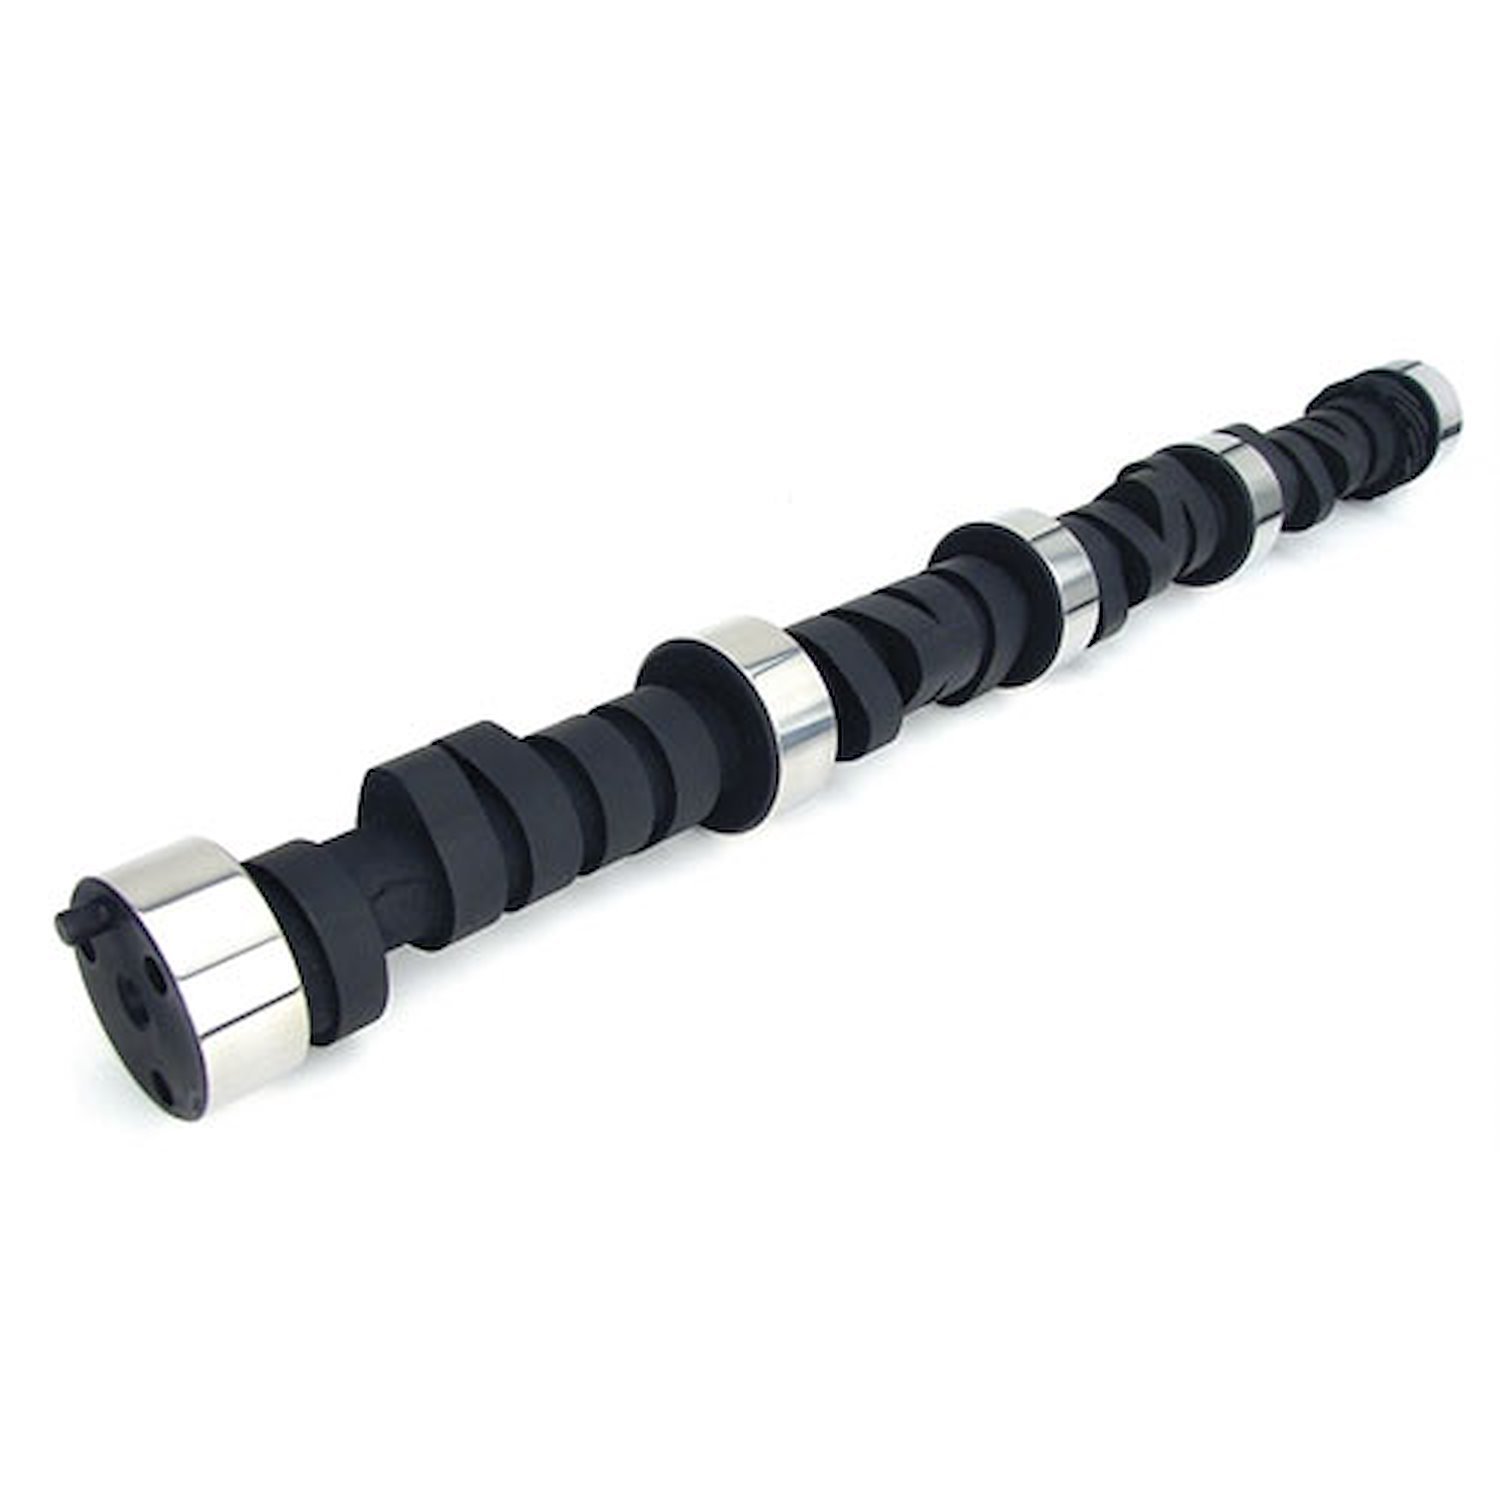 Xtreme Energy 249H Hydraulic Flat Tappet Camshaft Only Lift .434"/.444" Duration 249°/260° RPM Range 1000-5000